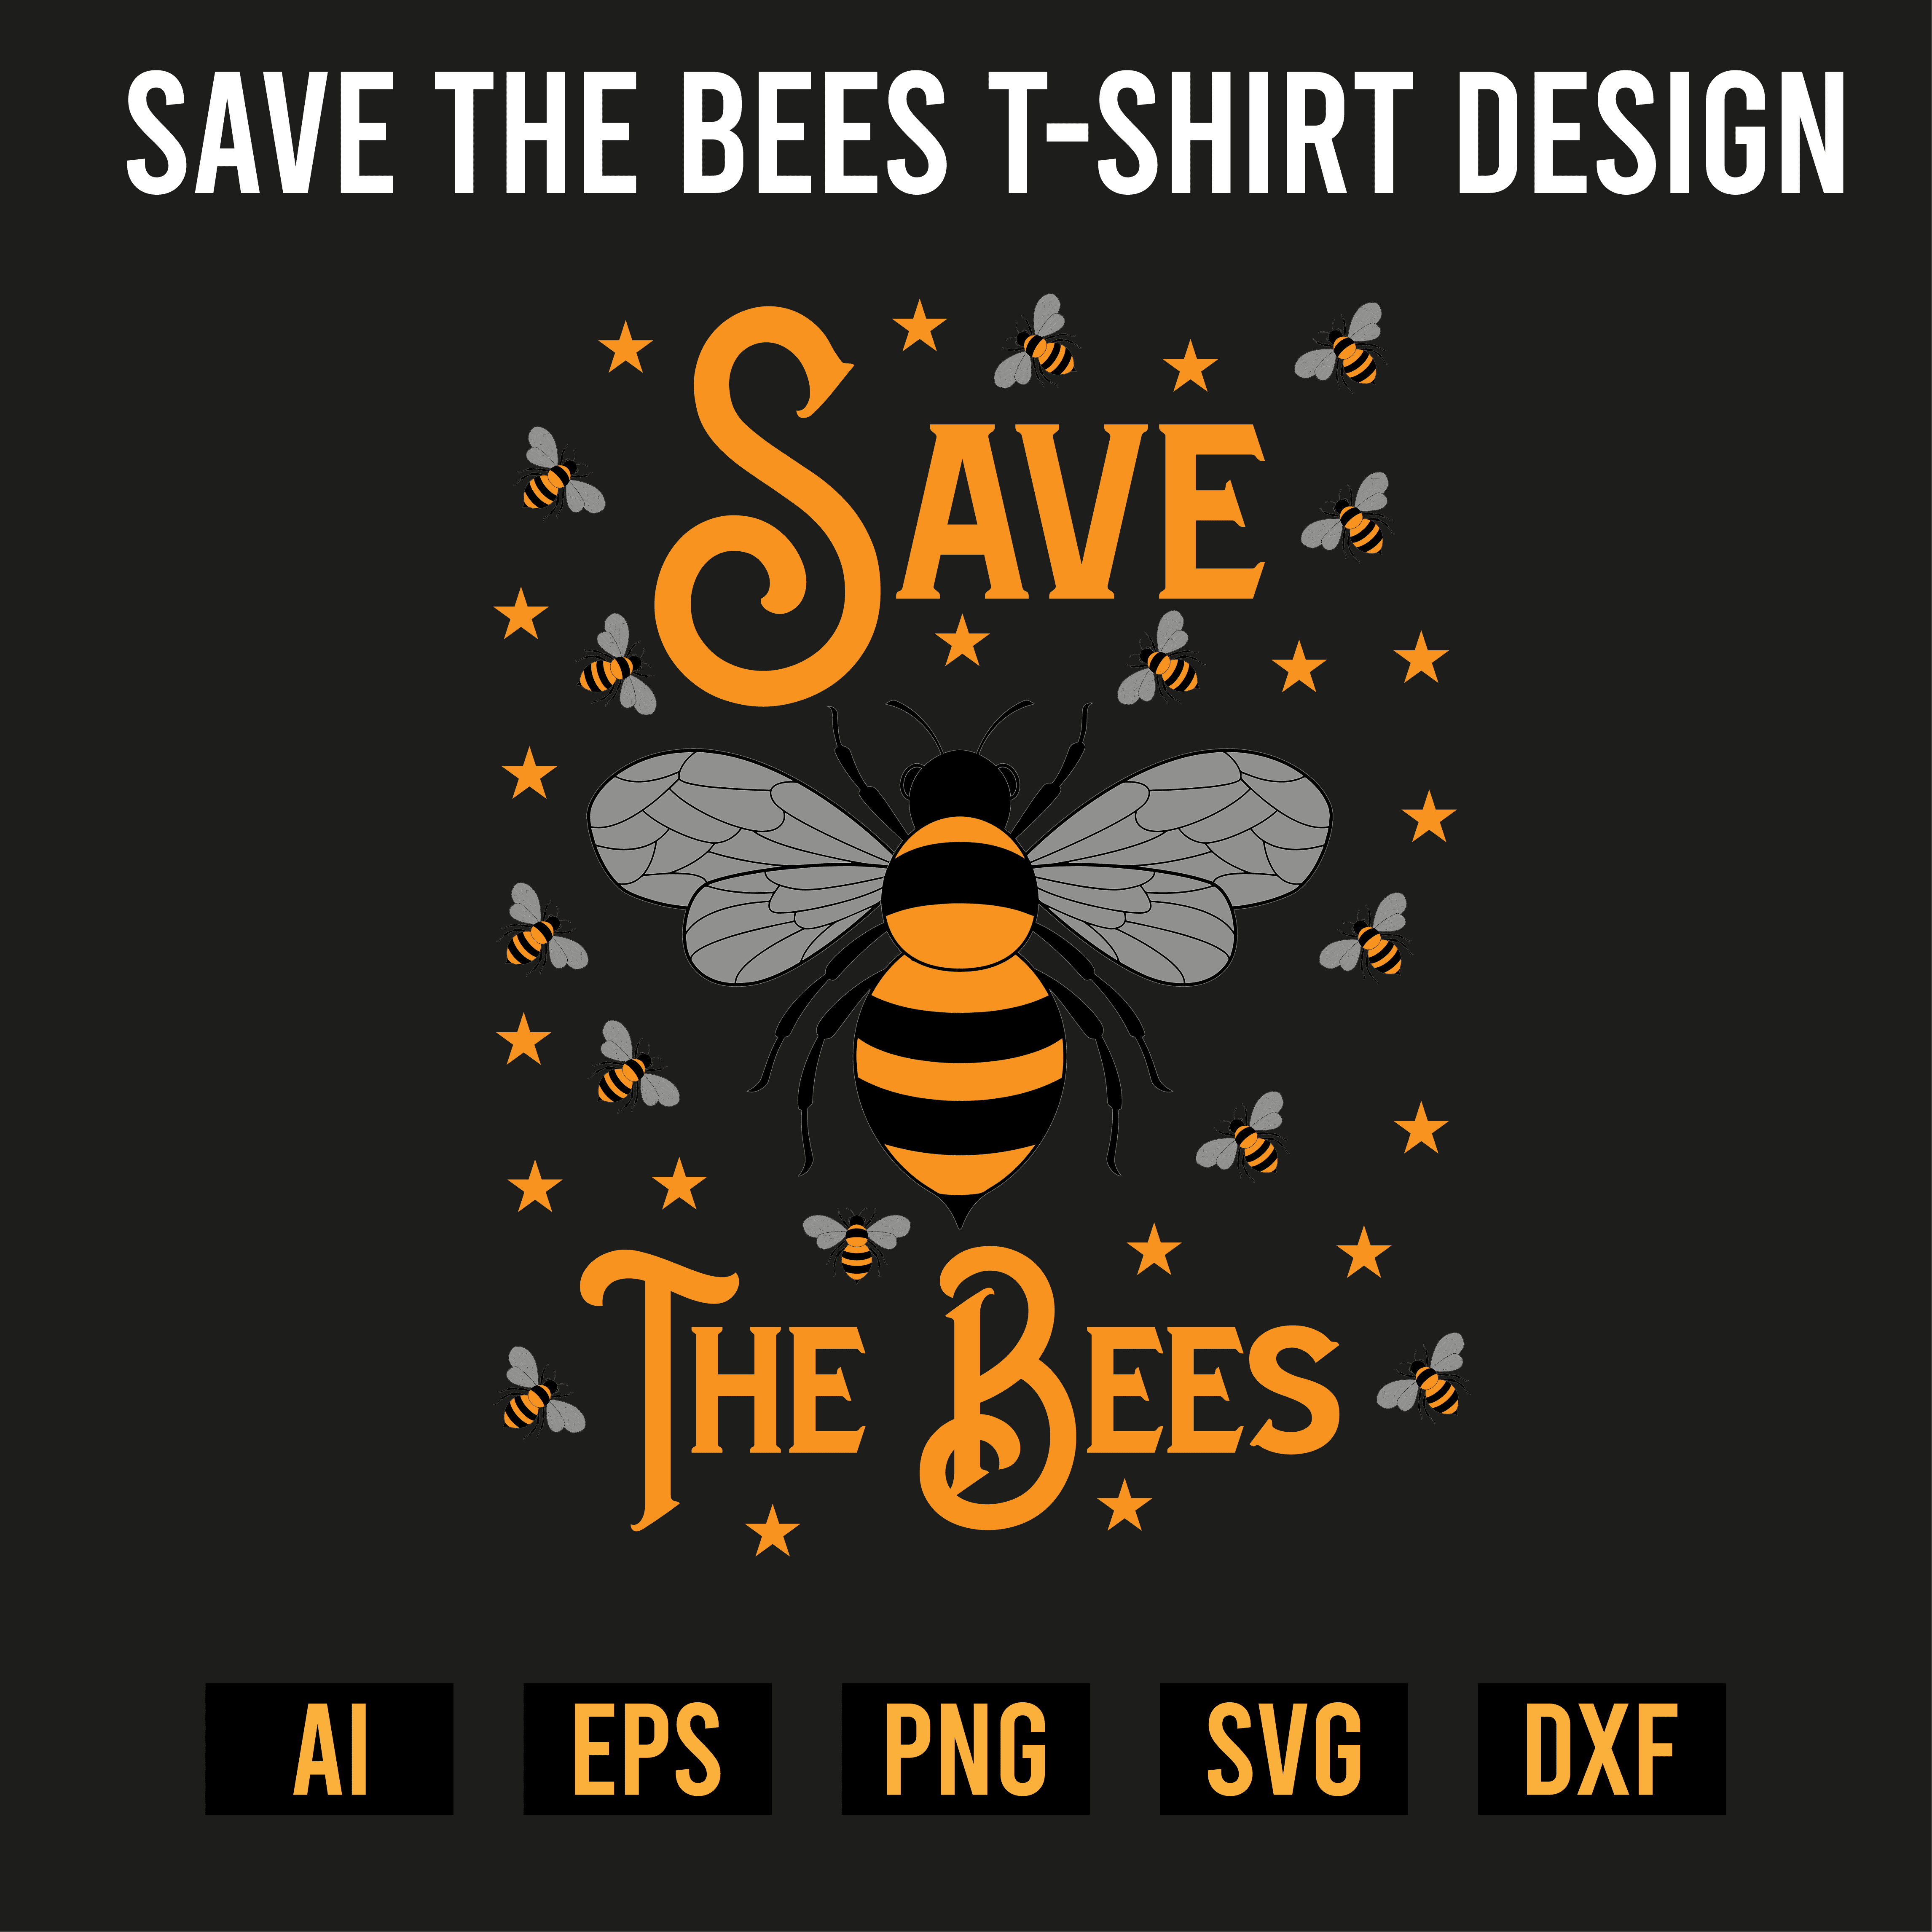 Save the Bees T- Shirt Design cover image.